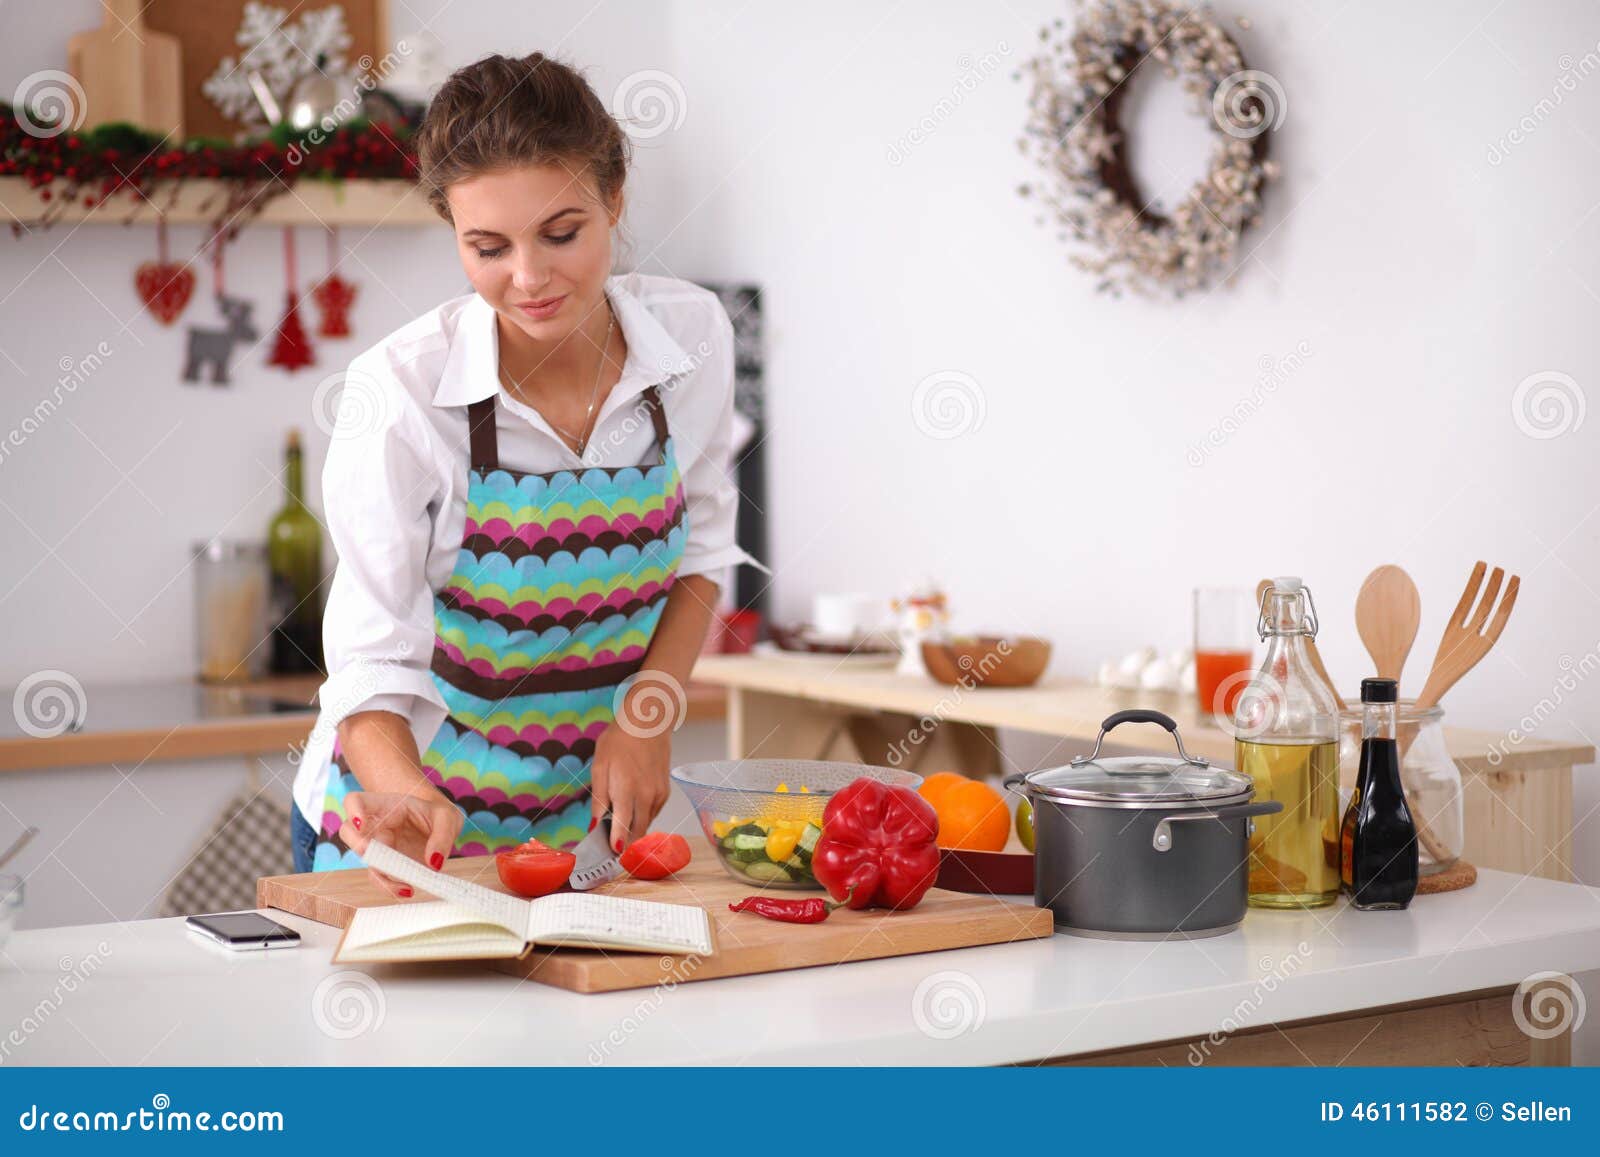 young woman reading cookbook in the kitchen,